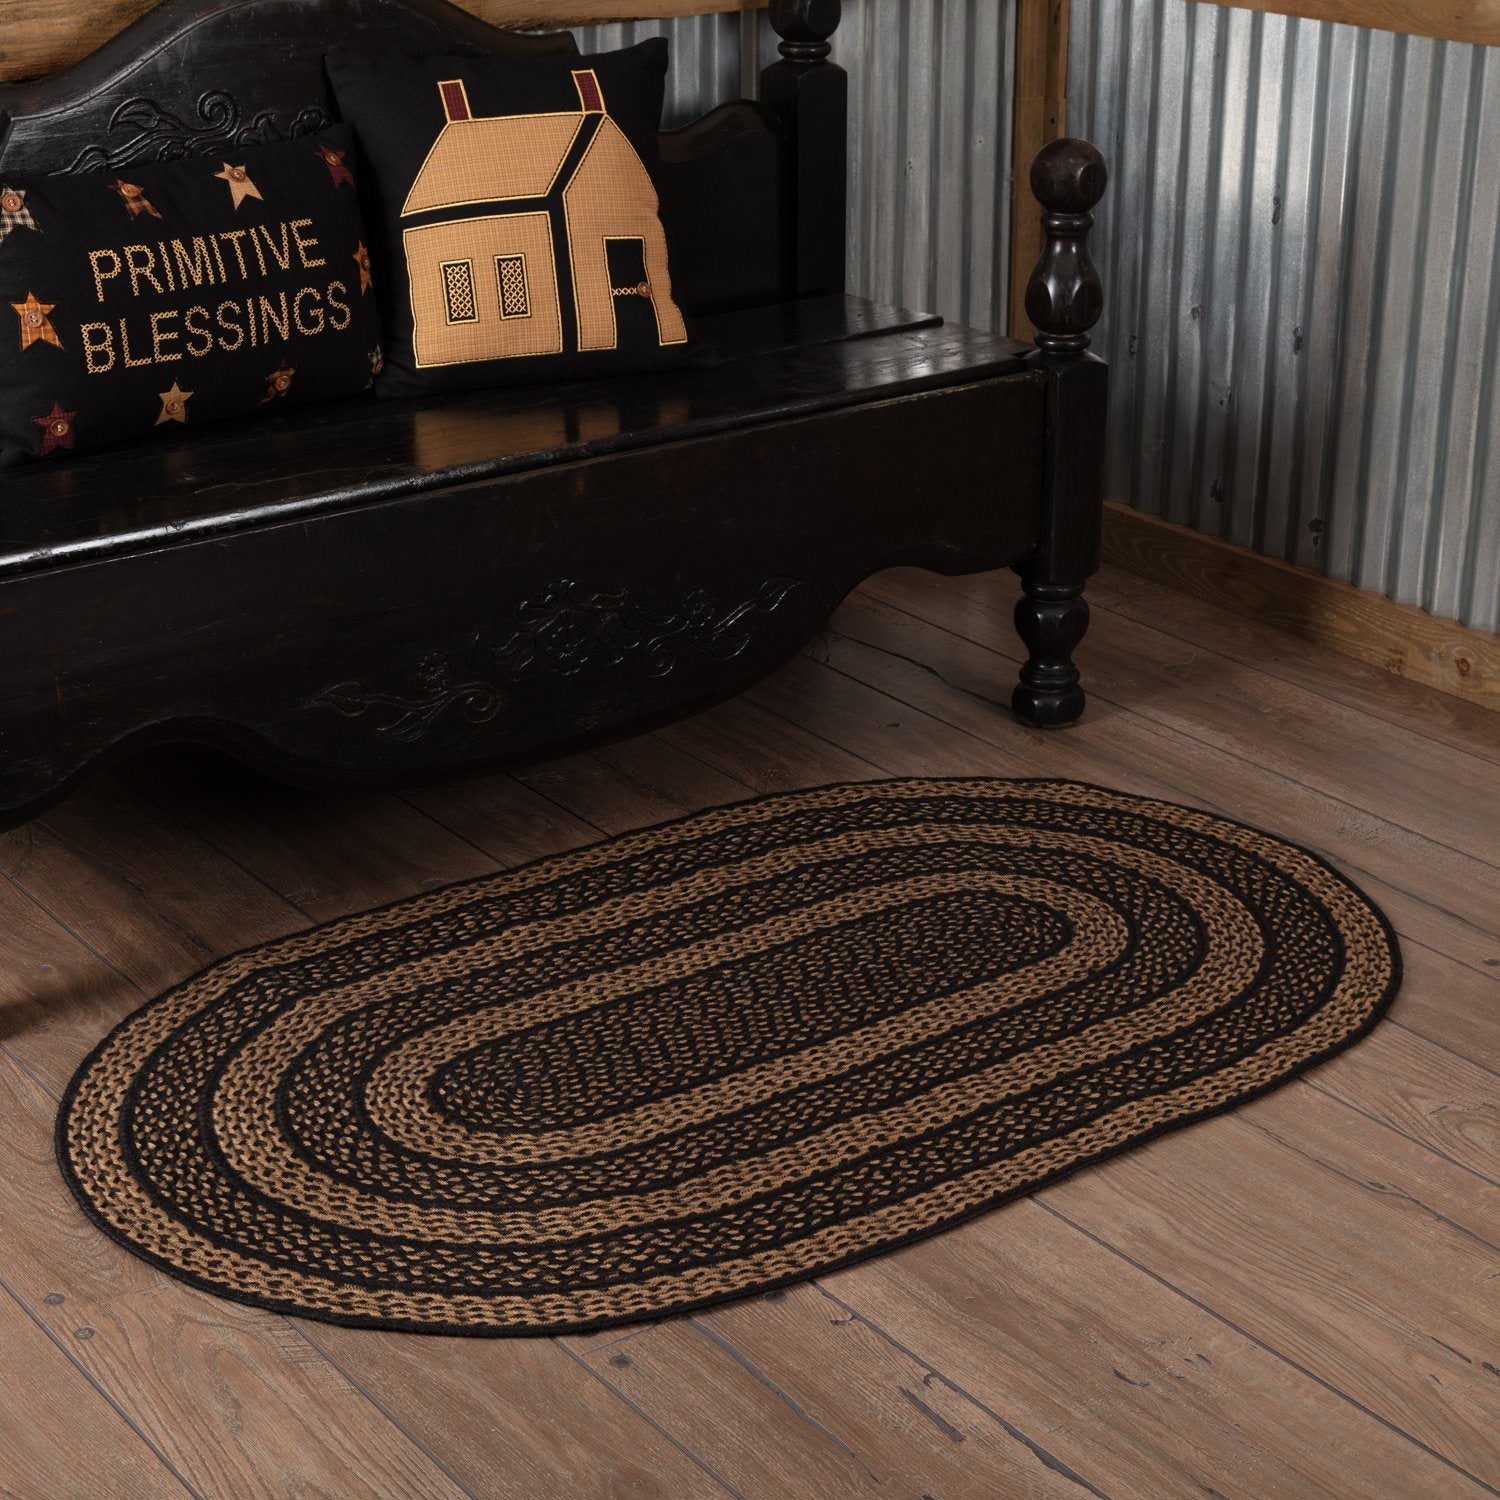 Black and Tan Braided Rug with Stars Primitive Country Oval